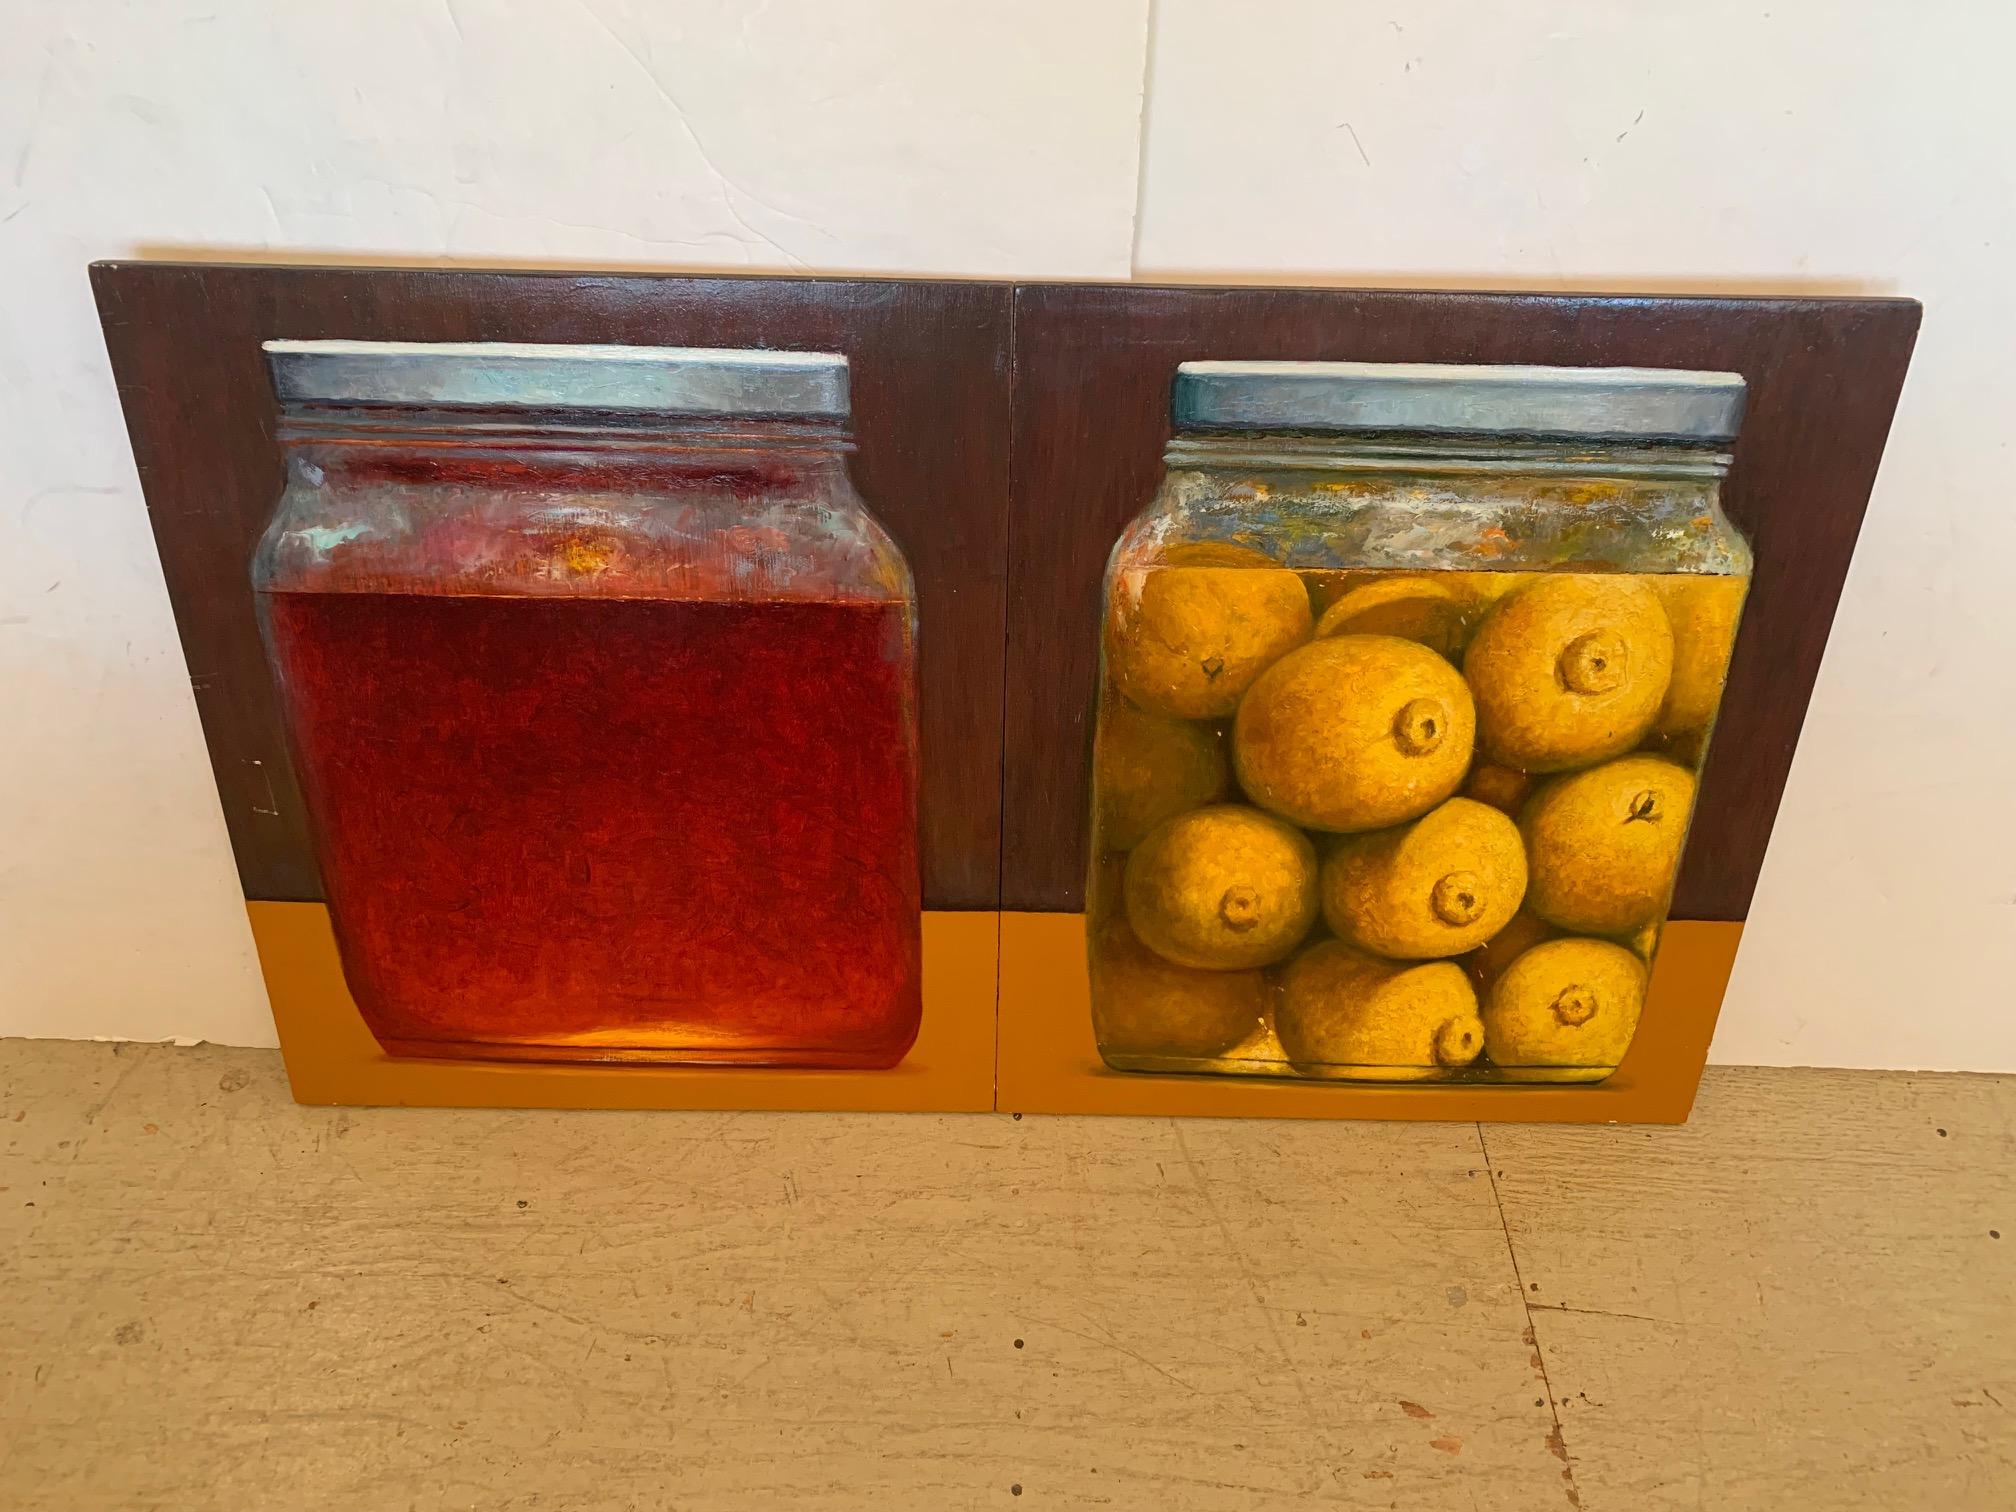 Superb original oil on board titled Cranberrybog Honey and Preserved Lemons by Ken Beck, signed on back. You can practically smell the lemons and taste the amber honey. The jars glisten and the surface of the painting is alive with texture.
2001.
 